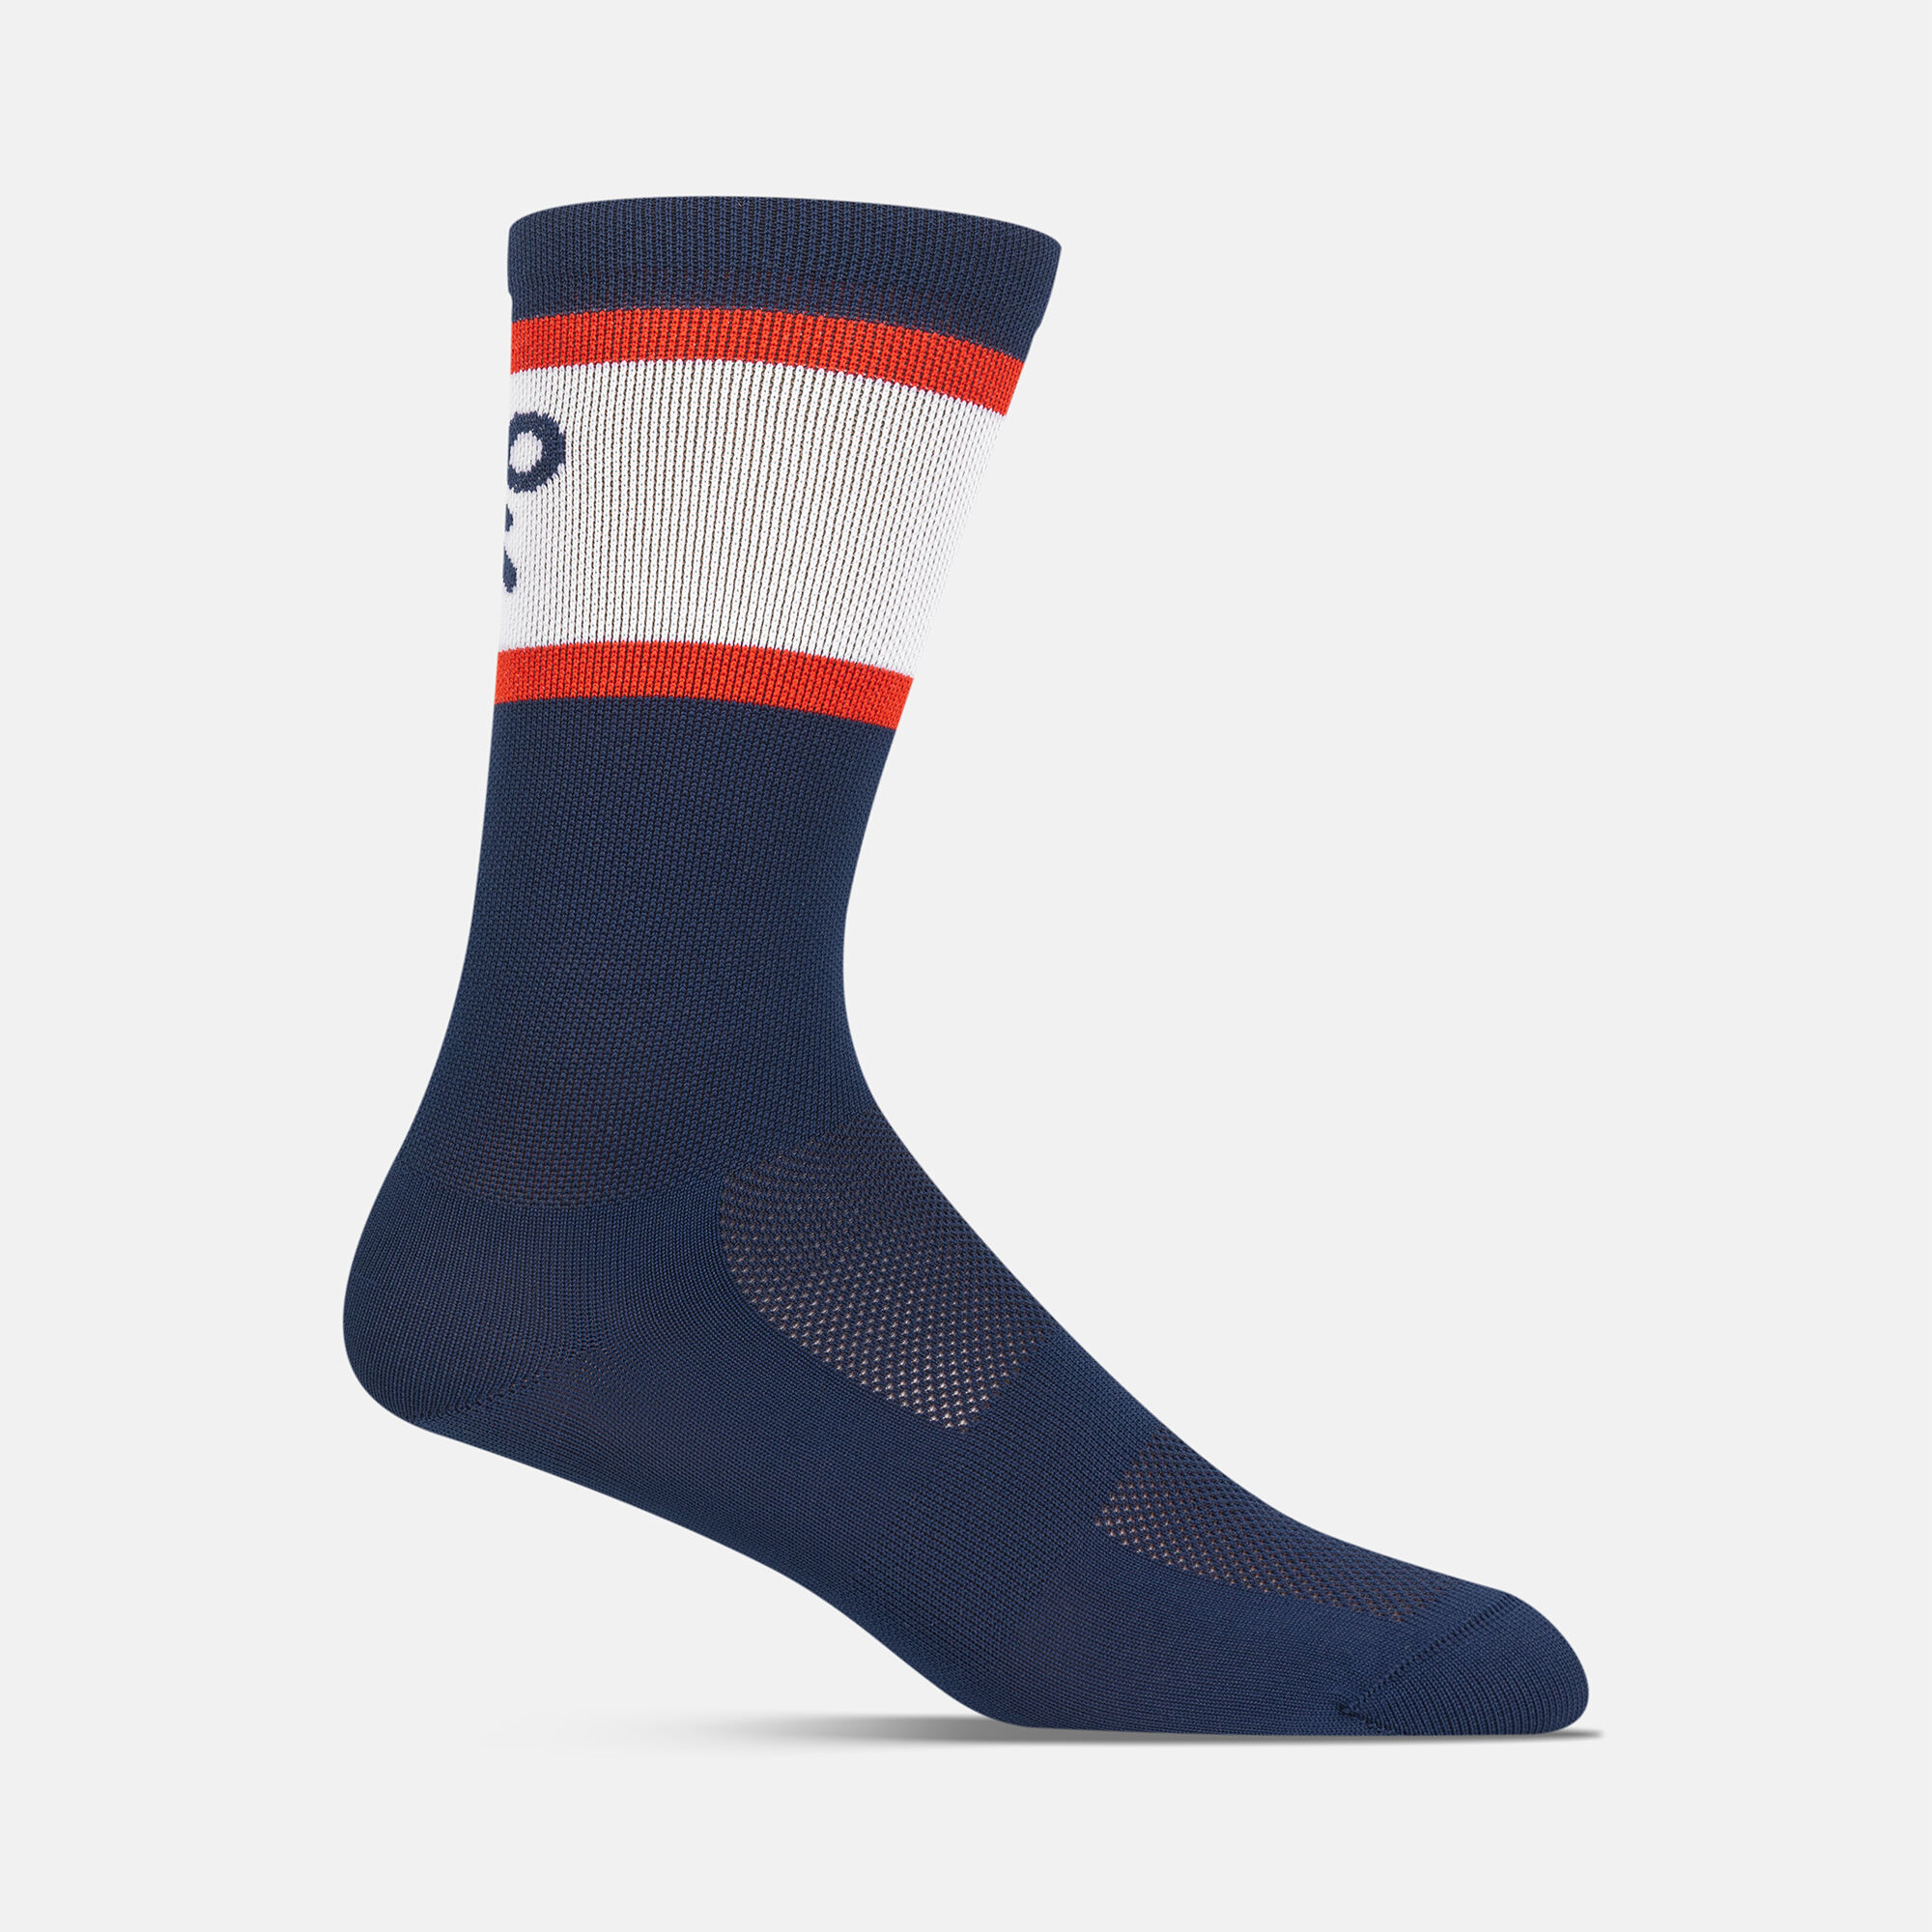 Giro Cycling Sock in Black Red and White 